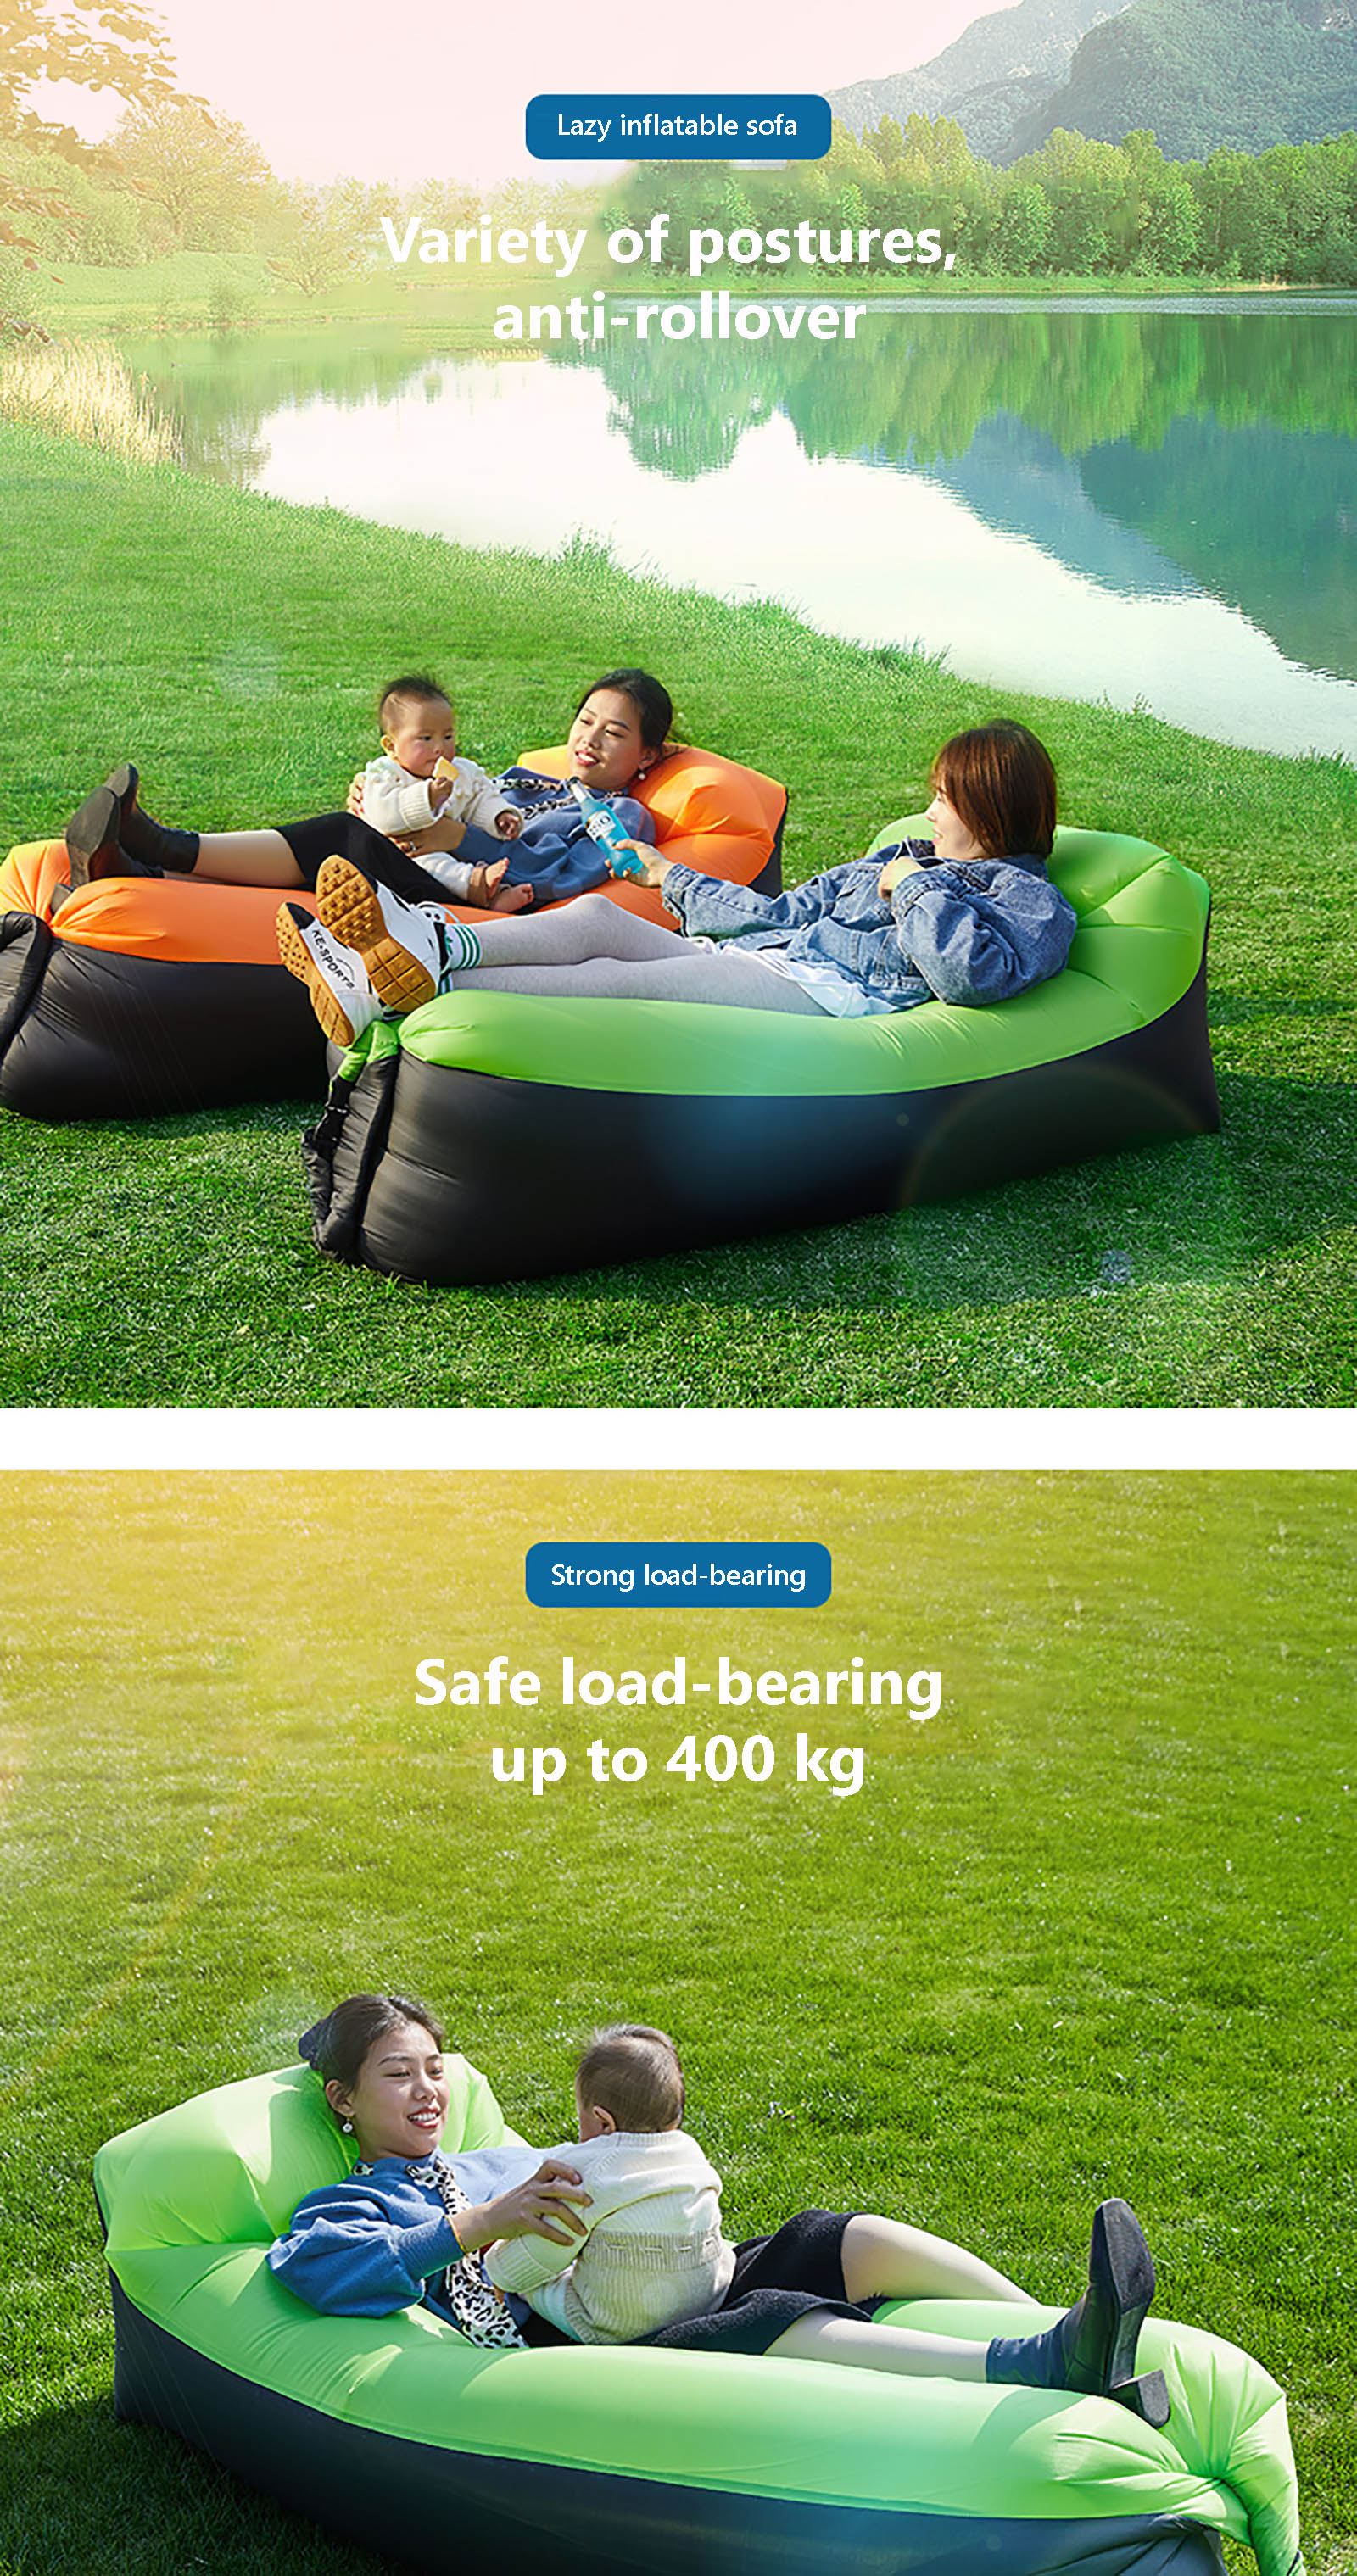 AutomatIc Inflatable Sleeping Bed 2 Person Air Mattress Thickened Portable  Car Outdoor Lazy Cushion Self Driving Camping - buy AutomatIc Inflatable  Sleeping Bed 2 Person Air Mattress Thickened Portable Car Outdoor Lazy